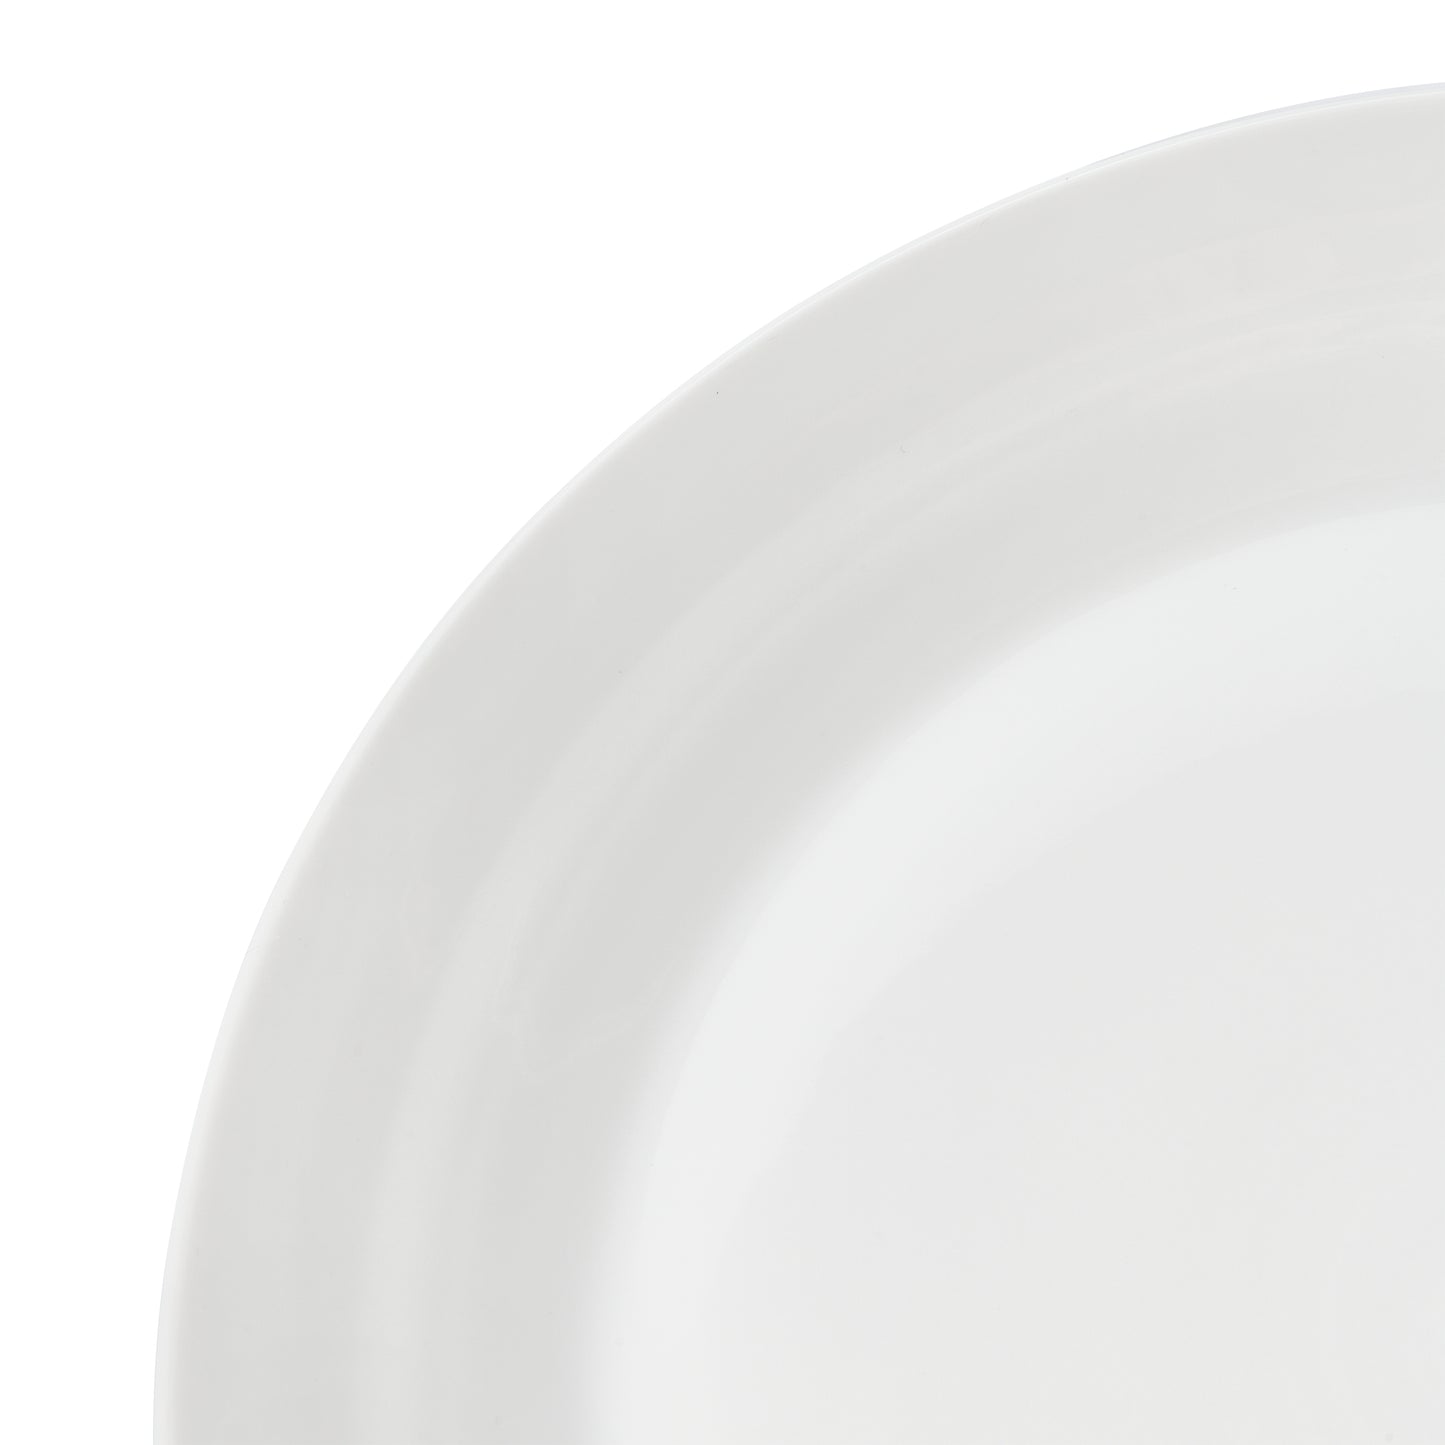 Royal Doulton 1815 Pure Dinner Plate (Set of 4)